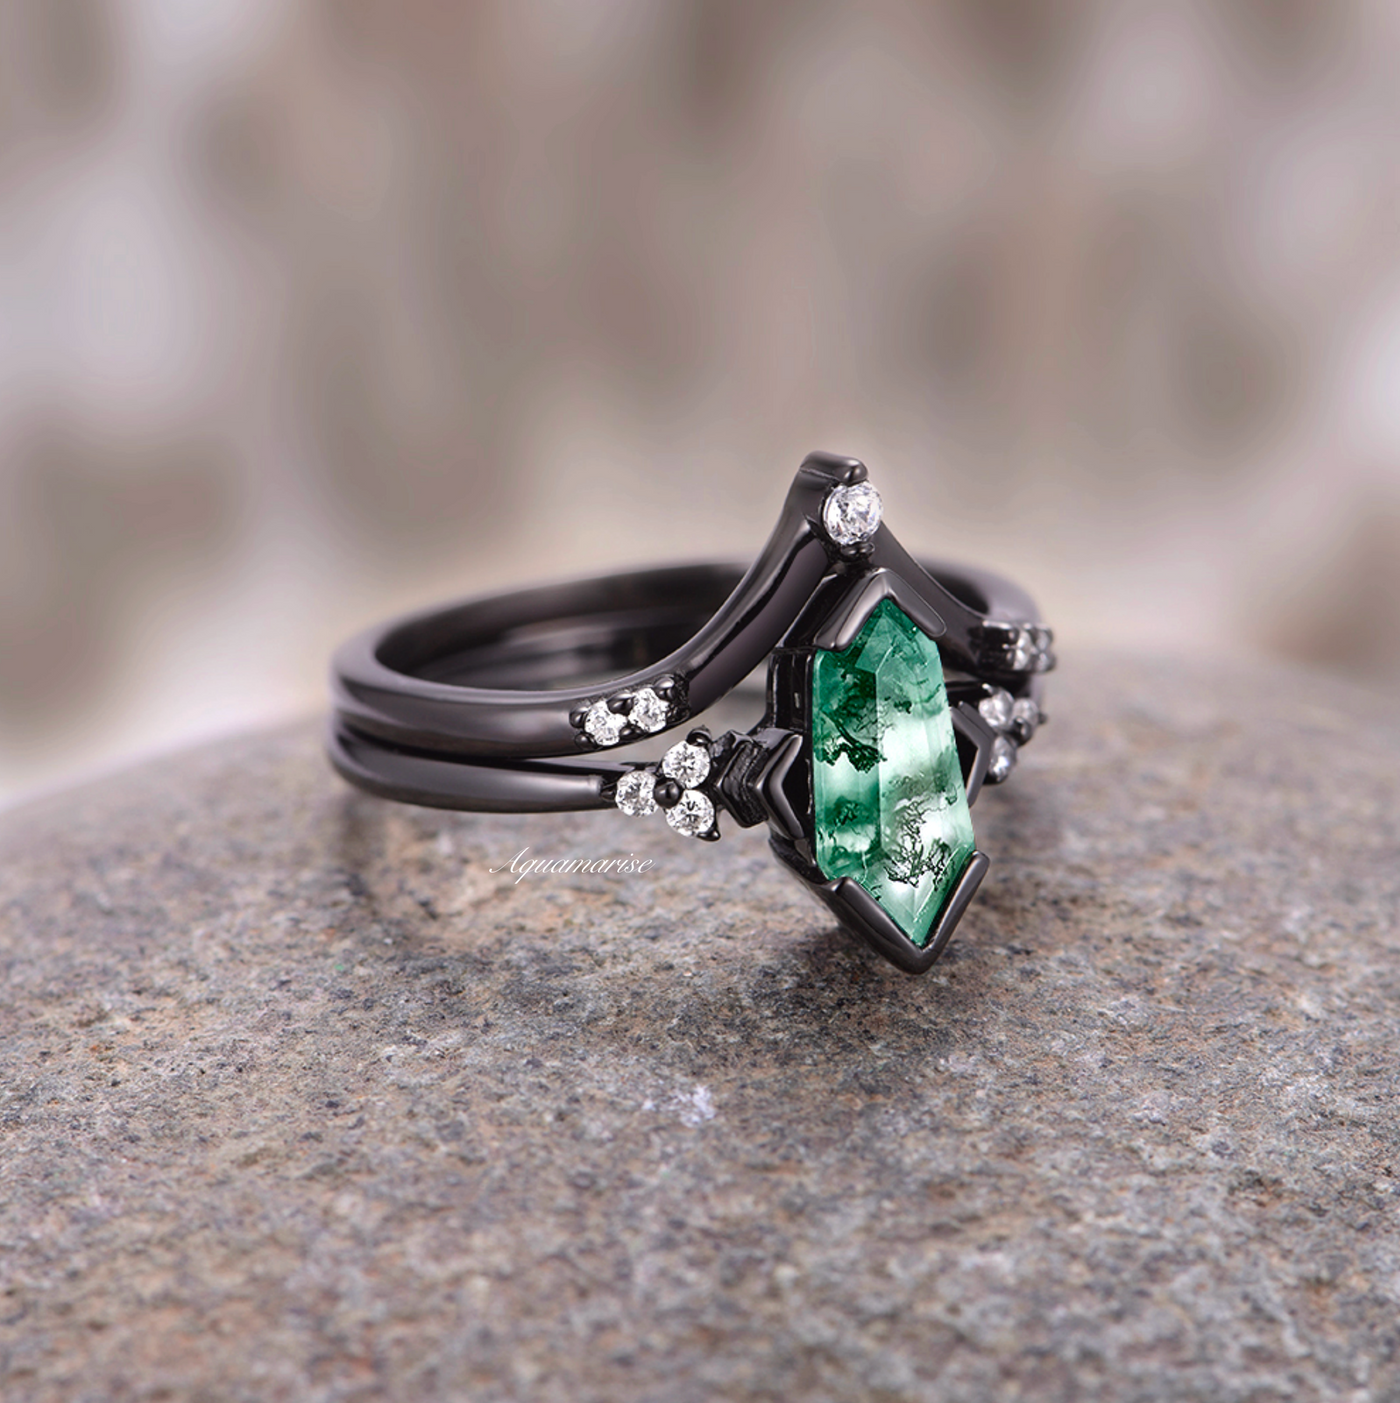 Coffin Cut Green Moss Agate Ring- Black Rhodium Filled Sterling Silver Natural Agate Engagement Ring- Promise Ring- Anniversary Gift For Her